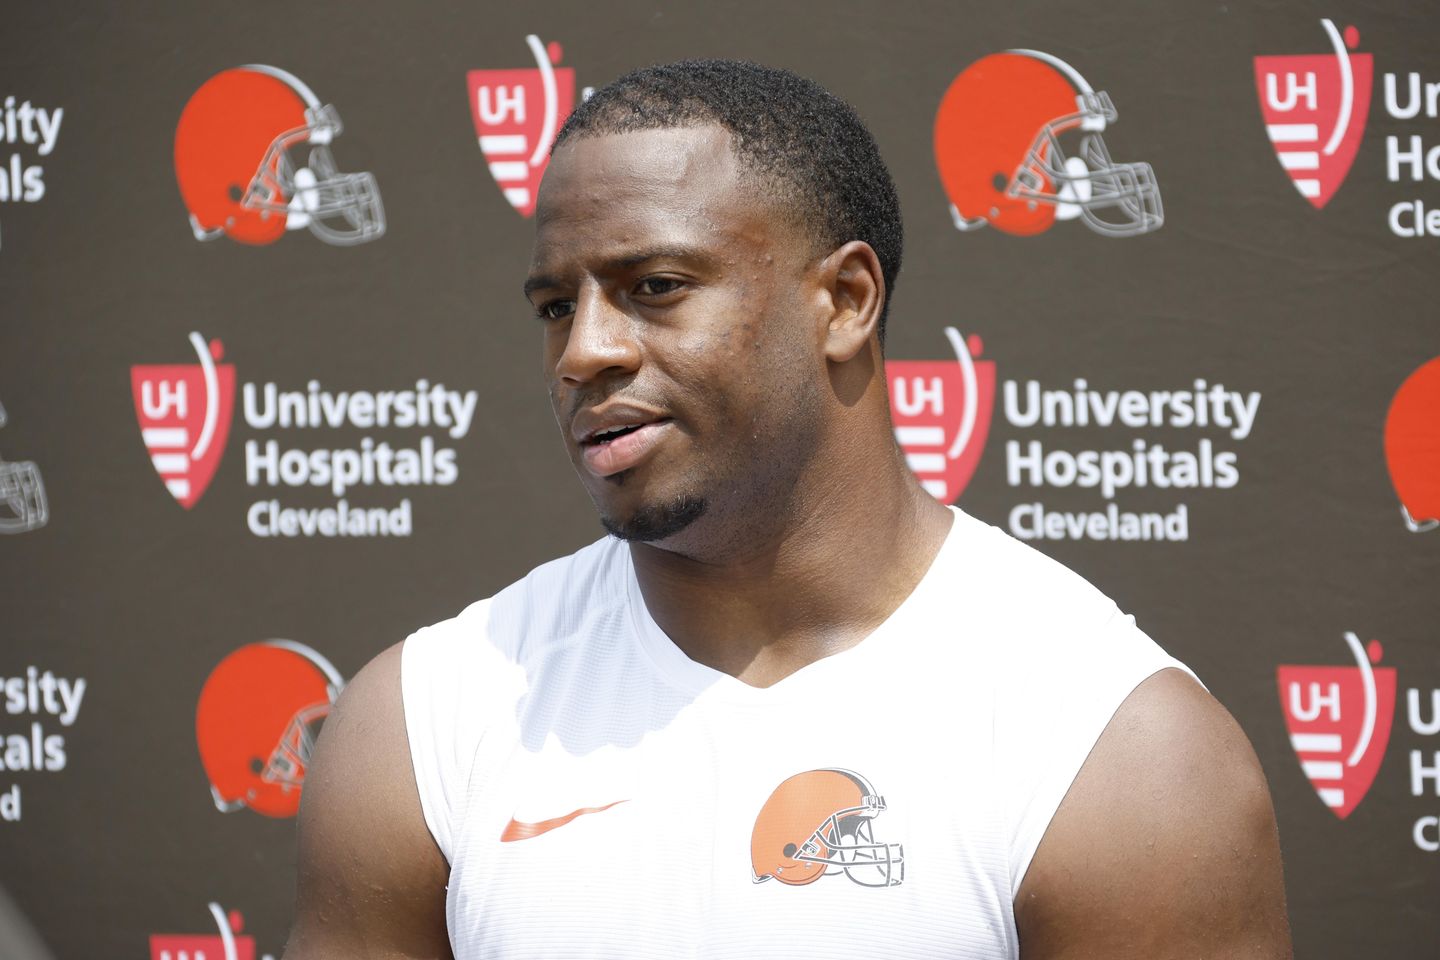 Browns restructure RB Nick Chubb's contract as he rehabs from season-ending injury, AP source says
